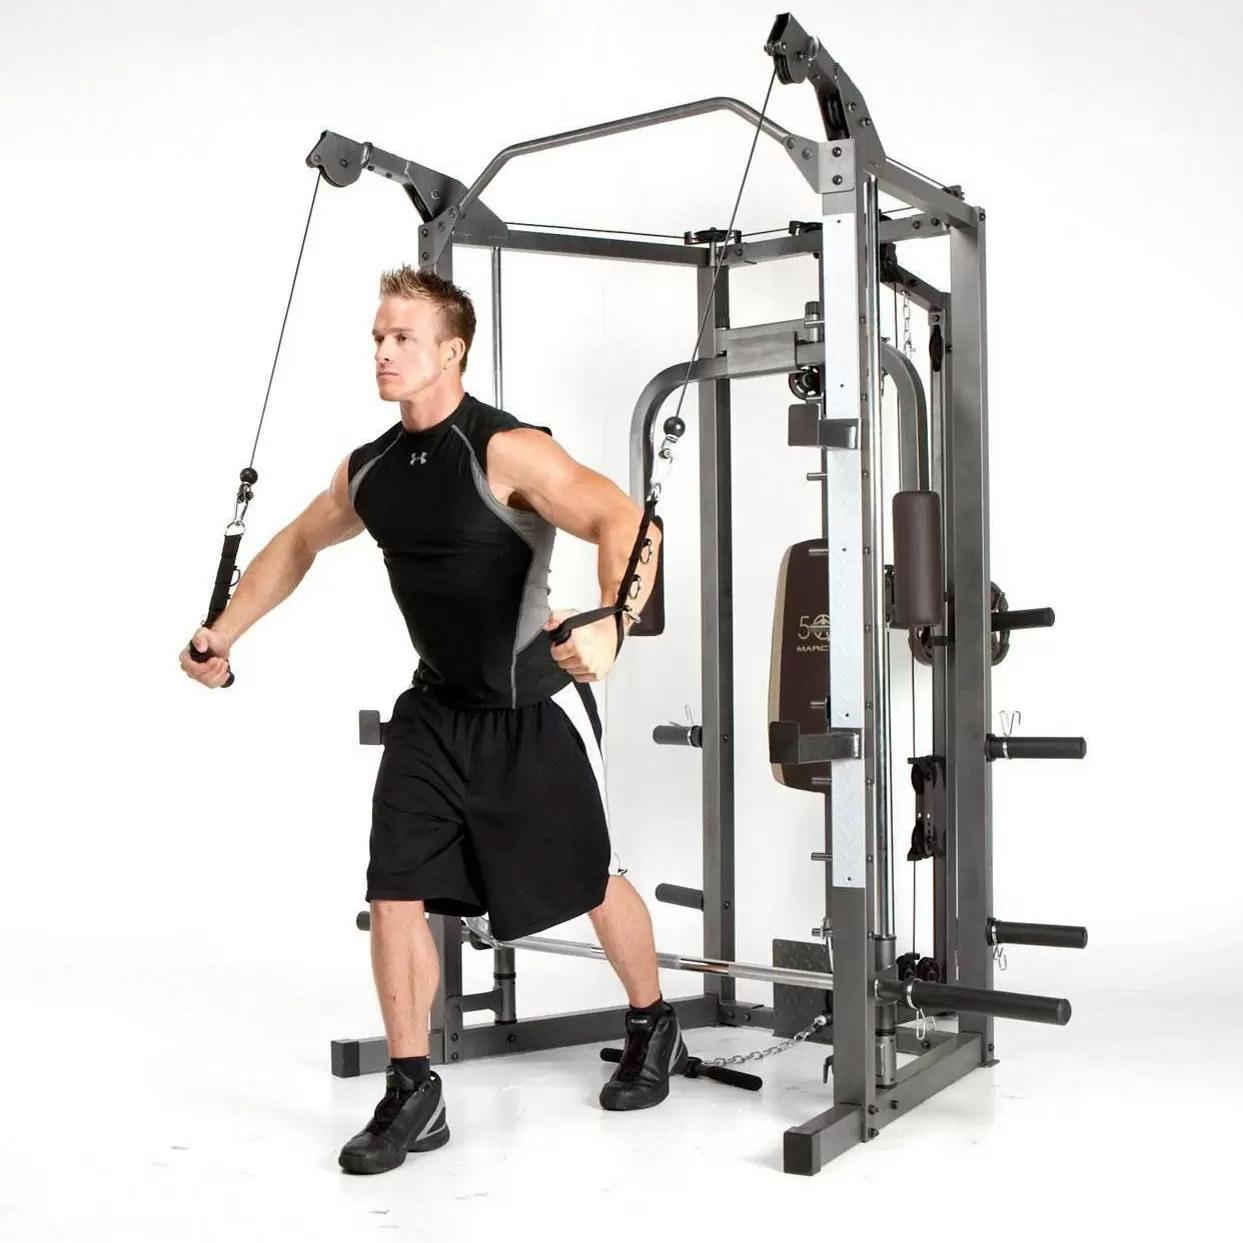 Marcy Combo Smith Heavy-Duty Total Body Strength Workout Machine for $629 Shipped